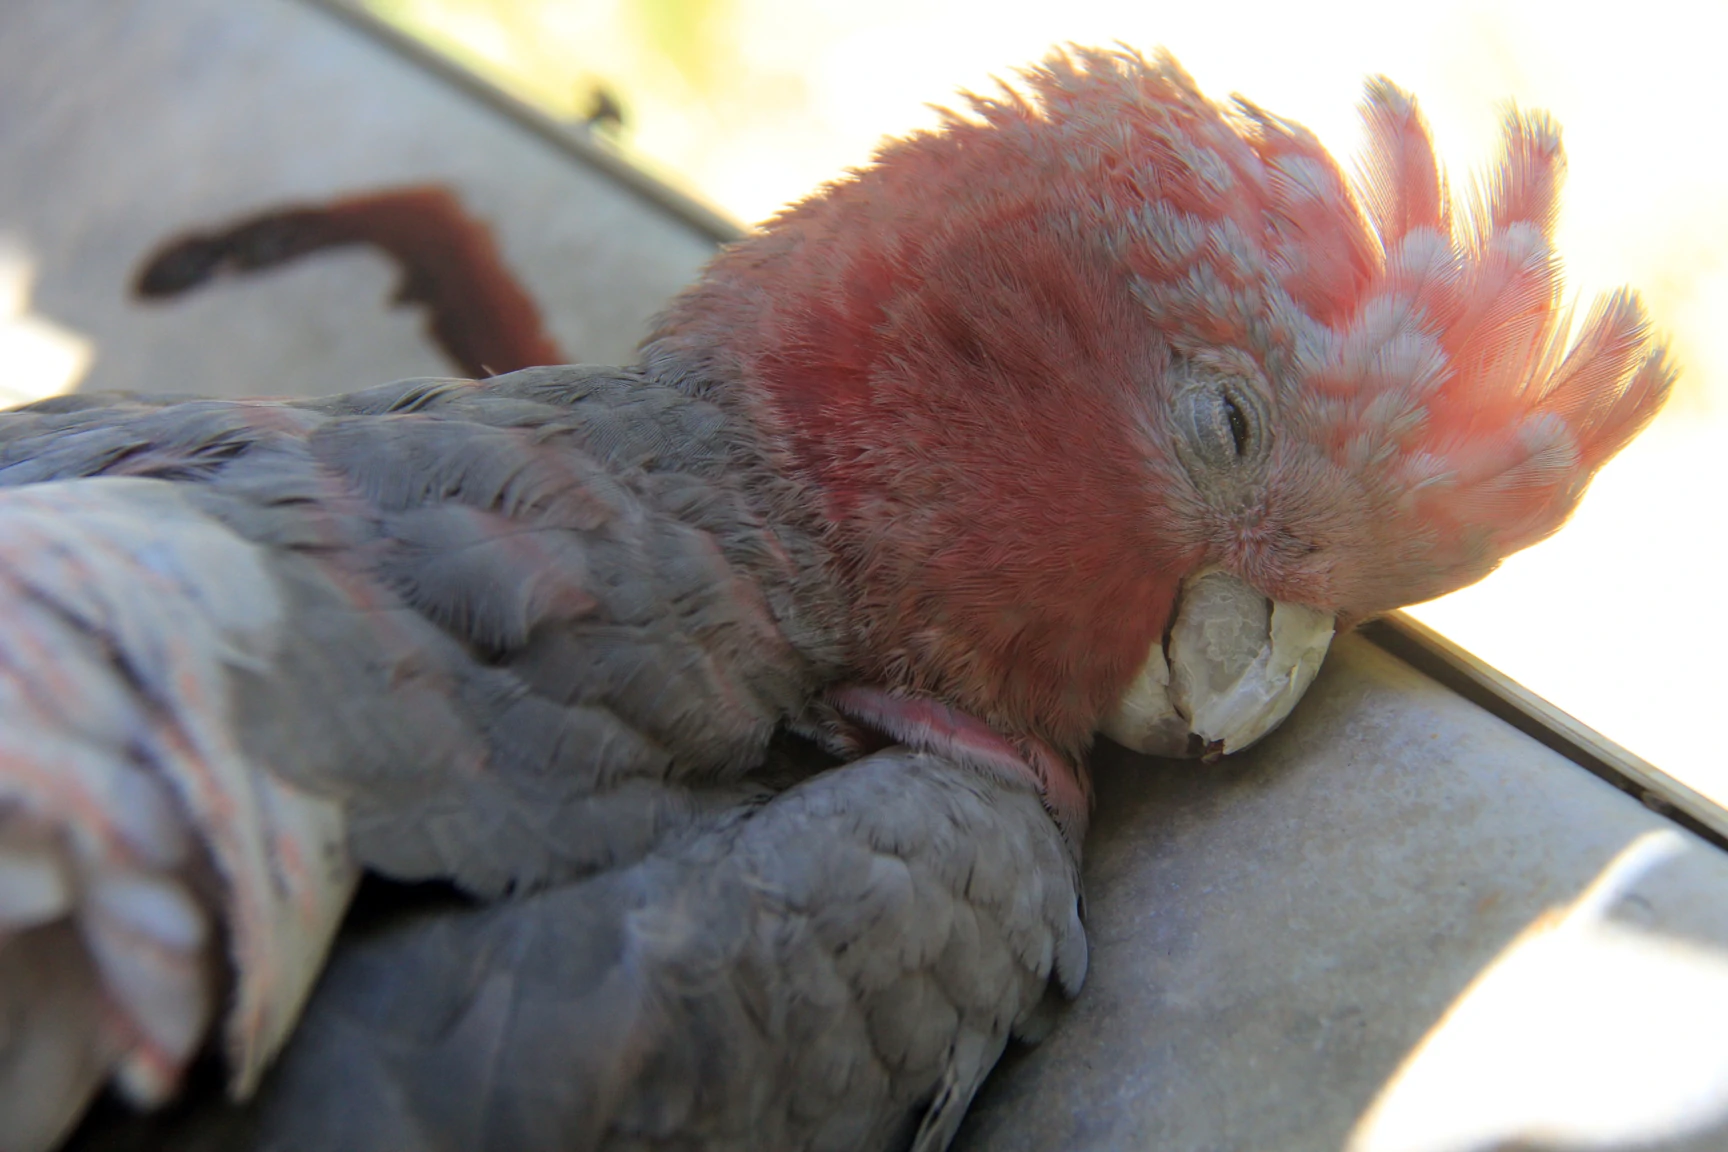 Face of a dead parrot, with blood leaking in the background.